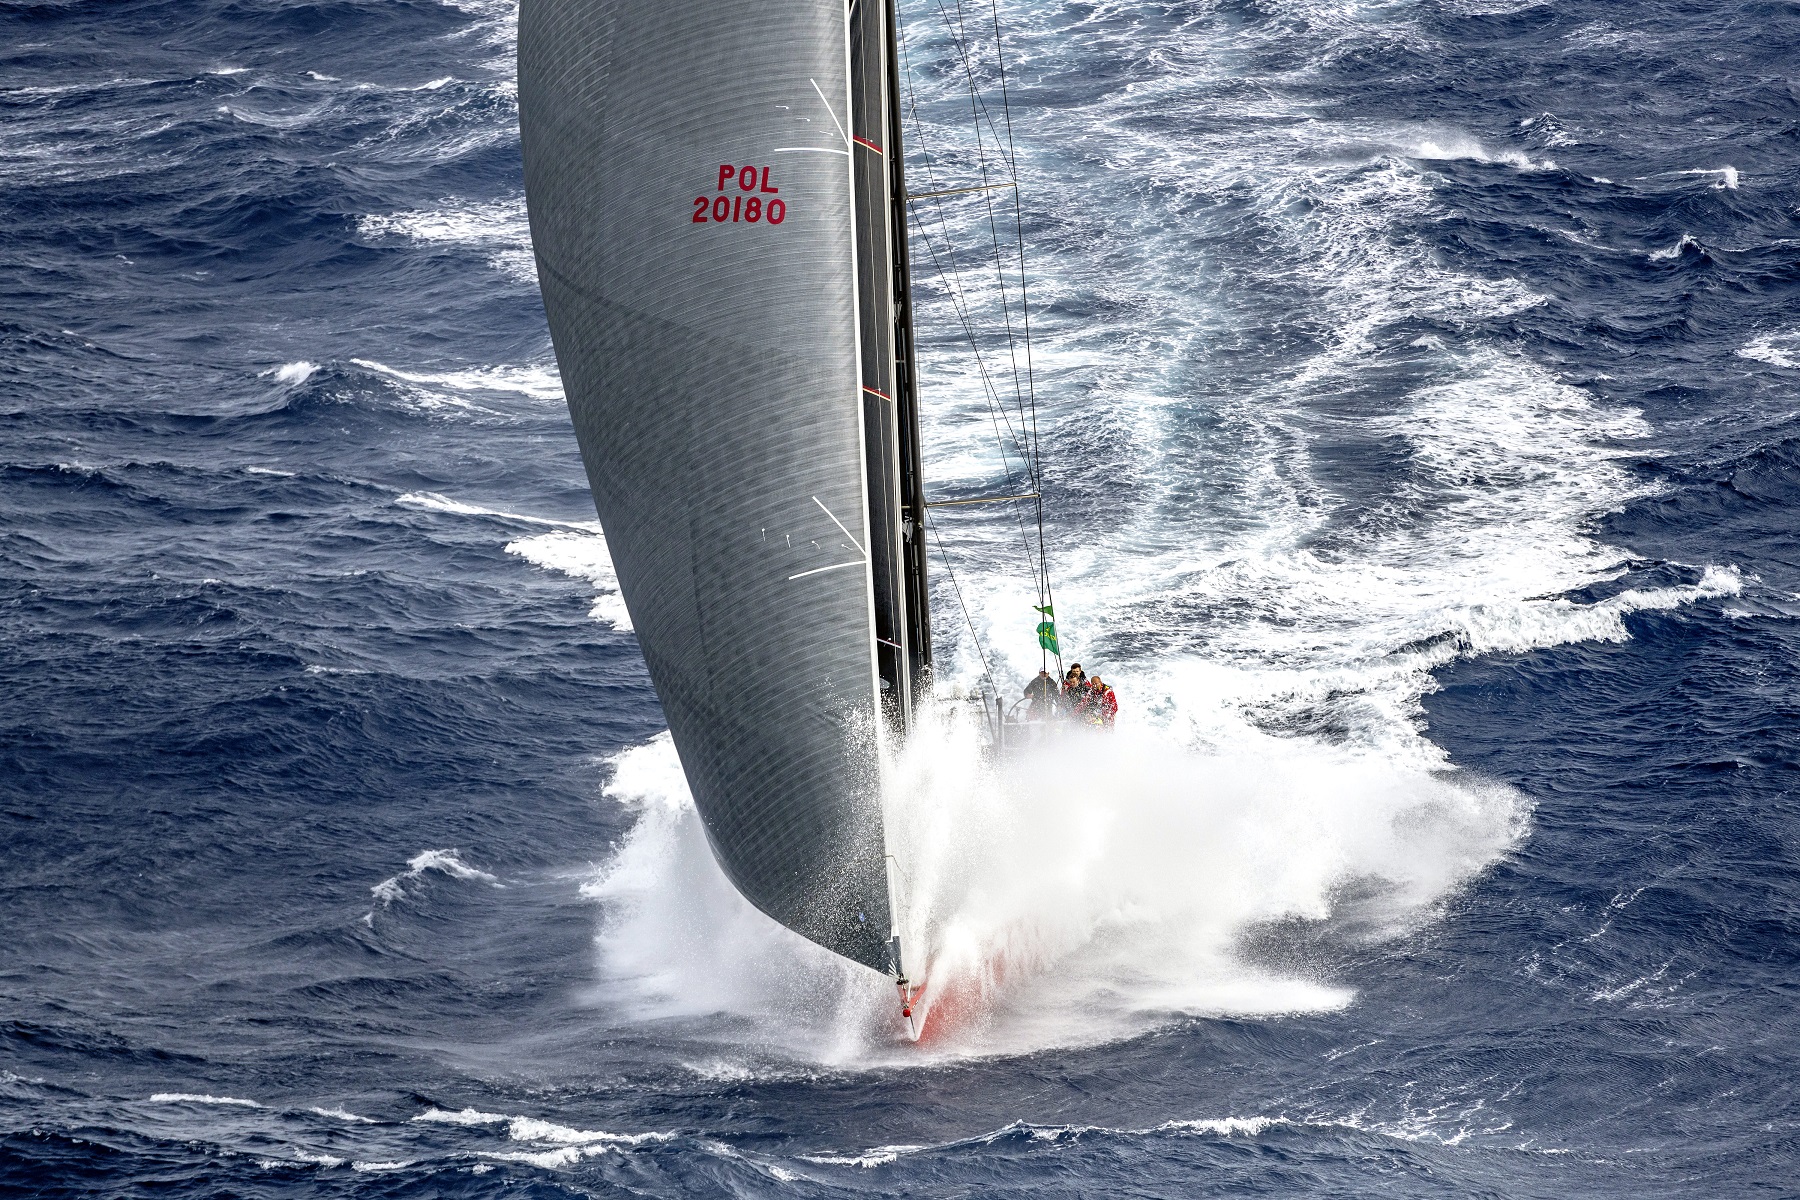 RORC Caribbean 600: 14 days to go - 77 boats - 600 nm course - boats from 16 countries - sailors from 30 nations - 1 great race - © Kurt Arrigo/Rolex